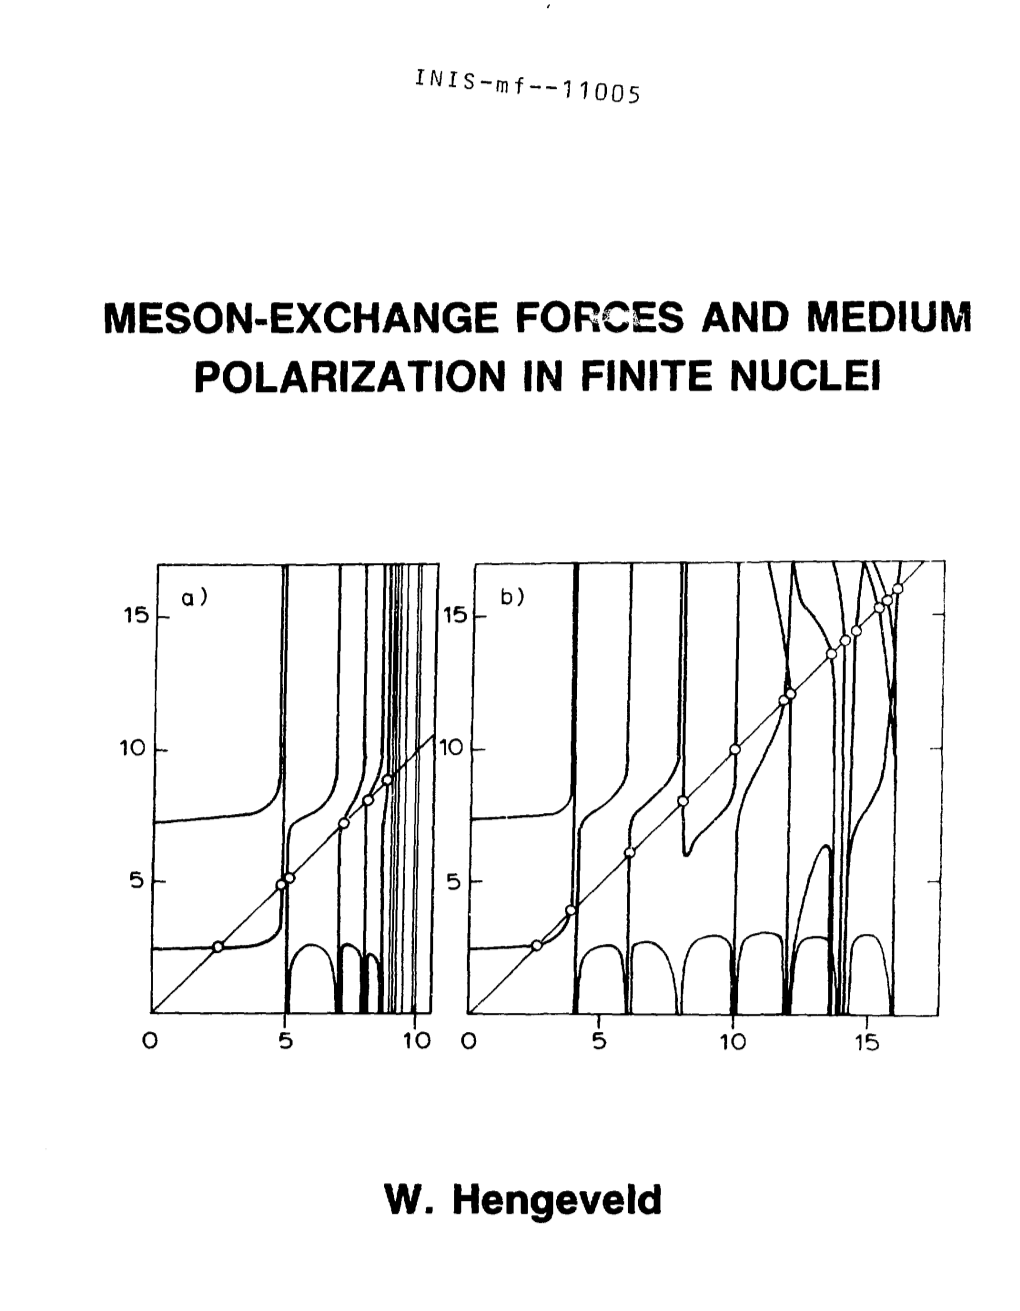 Meson-Exchange Forces and Medium Polarization in Finite Nuclei